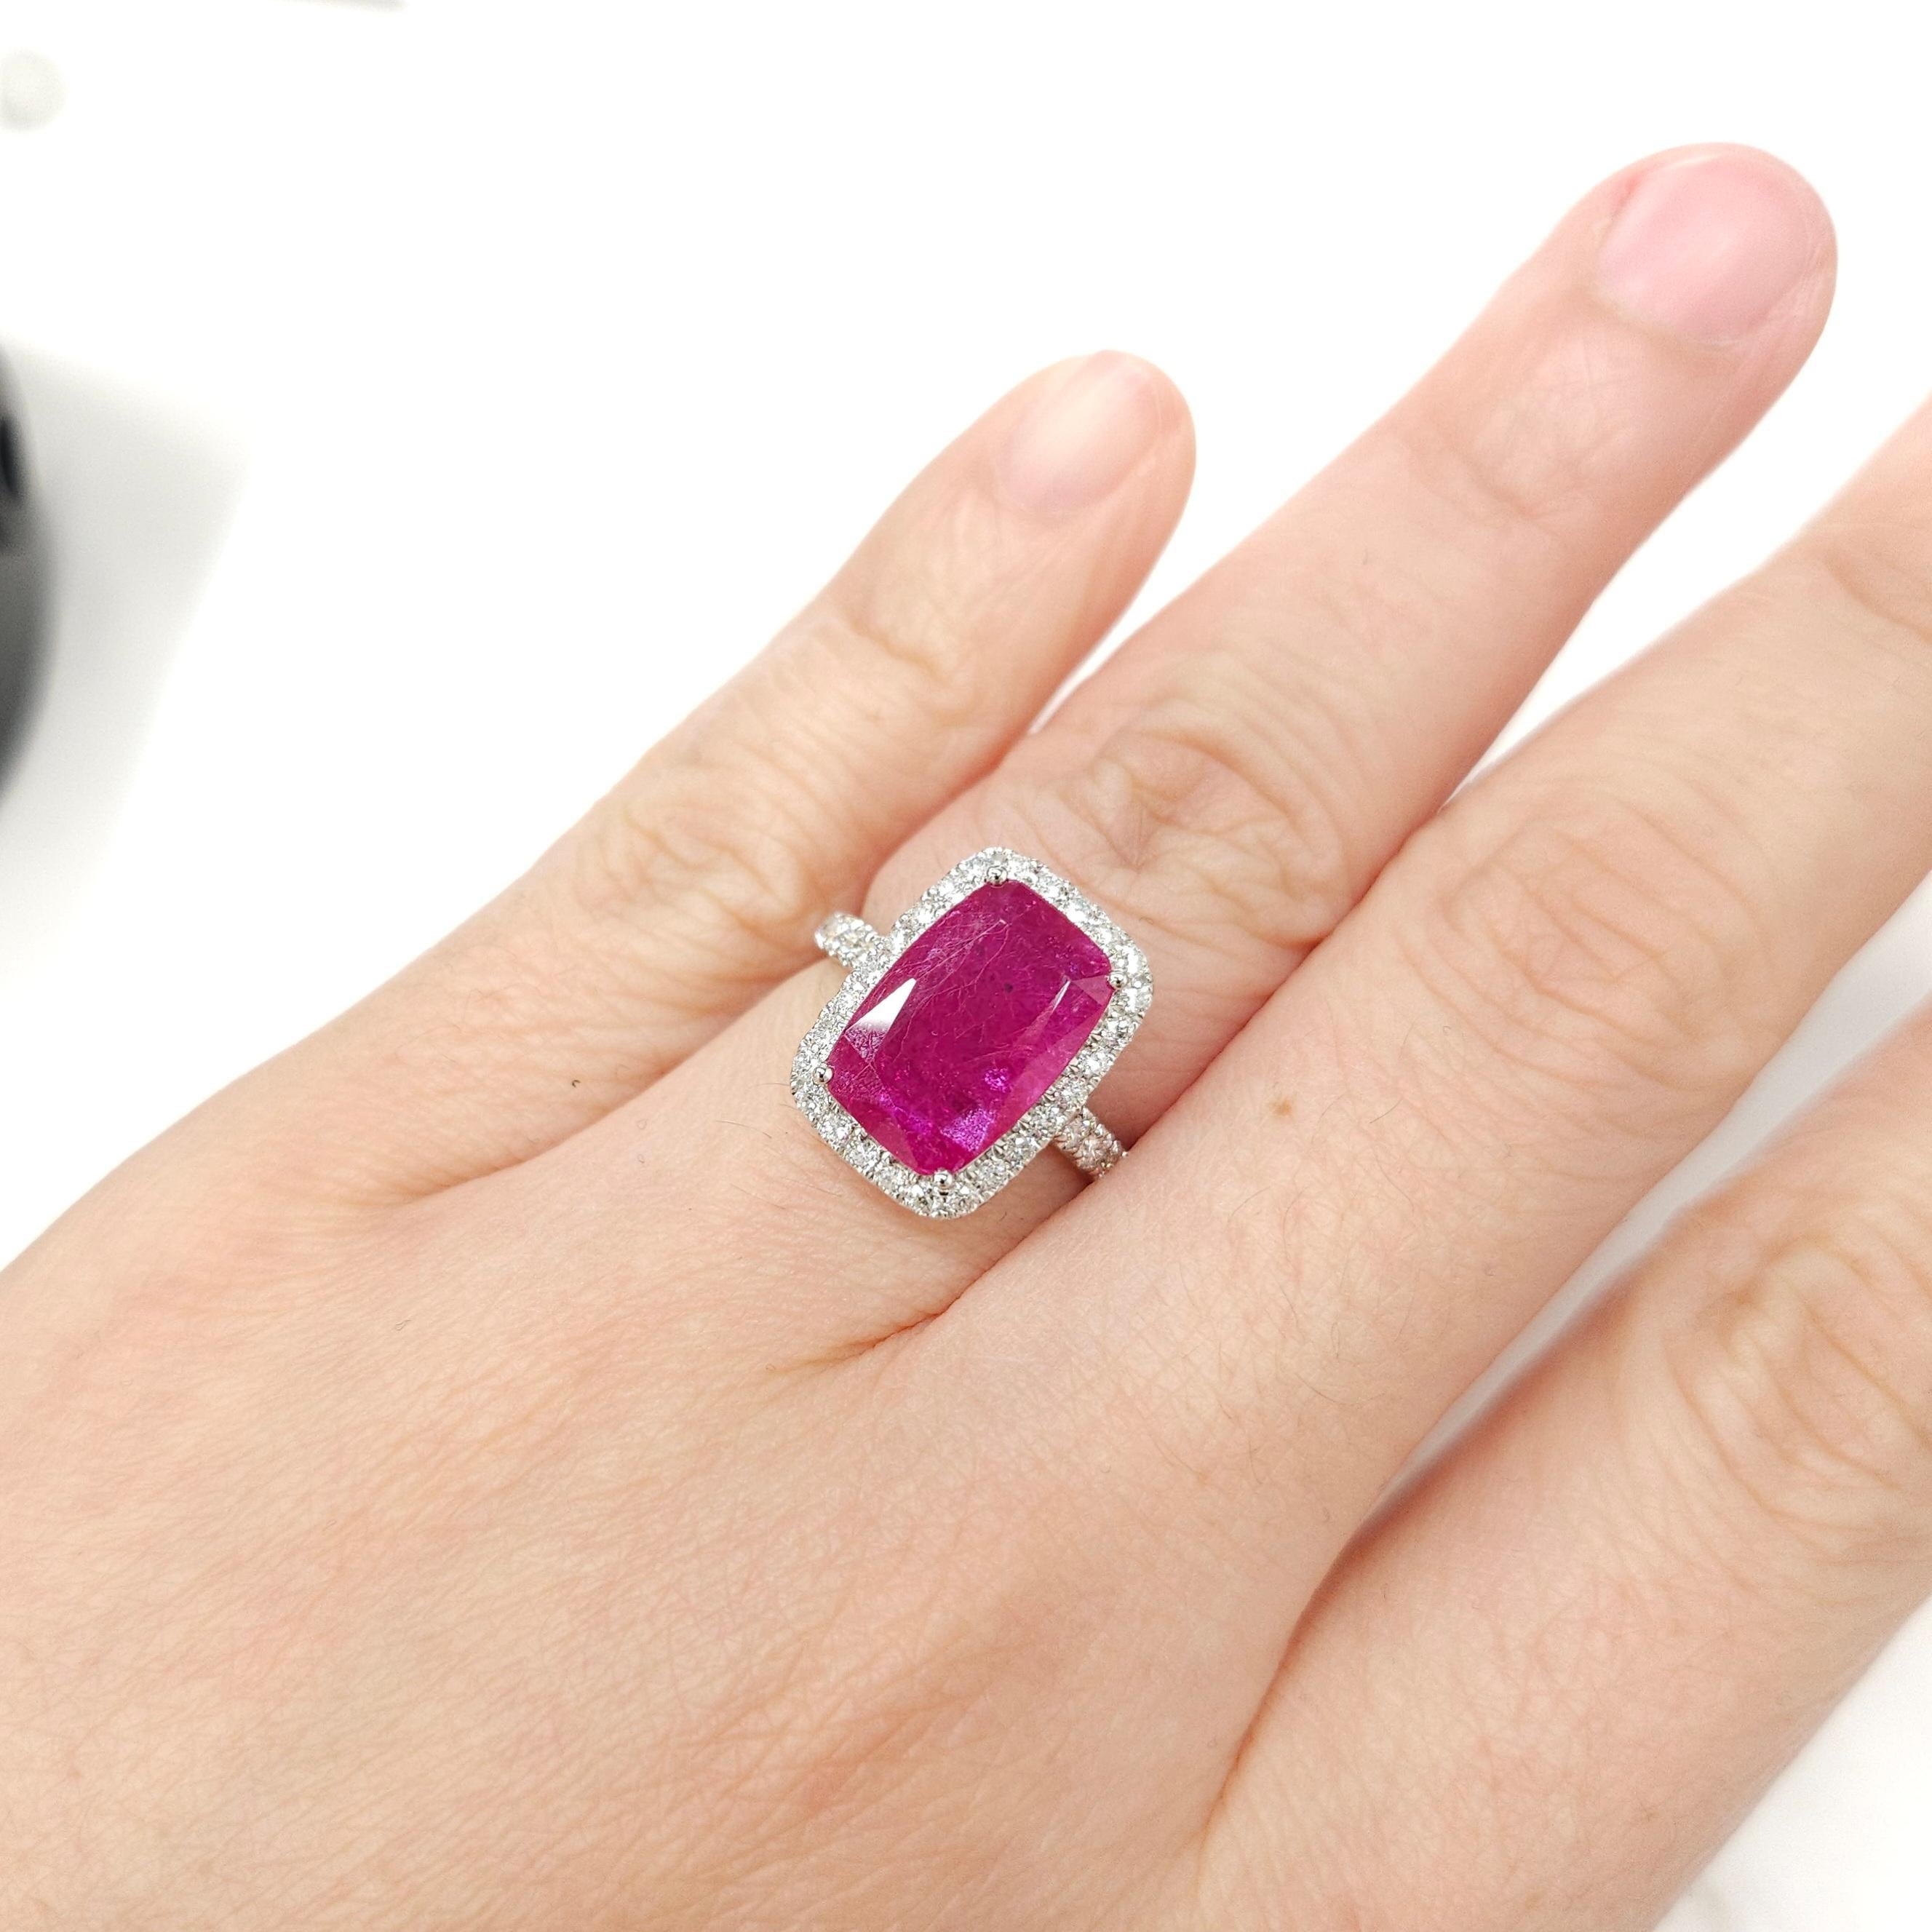 Introducing a true masterpiece of luxury and rarity, the AIG Certified 4.30 Carat Intense Red Unheated Natural Ruby from Burma Ring showcases unparalleled beauty and exceptional craftsmanship. This exquisite ring features a remarkable 4.30 carat